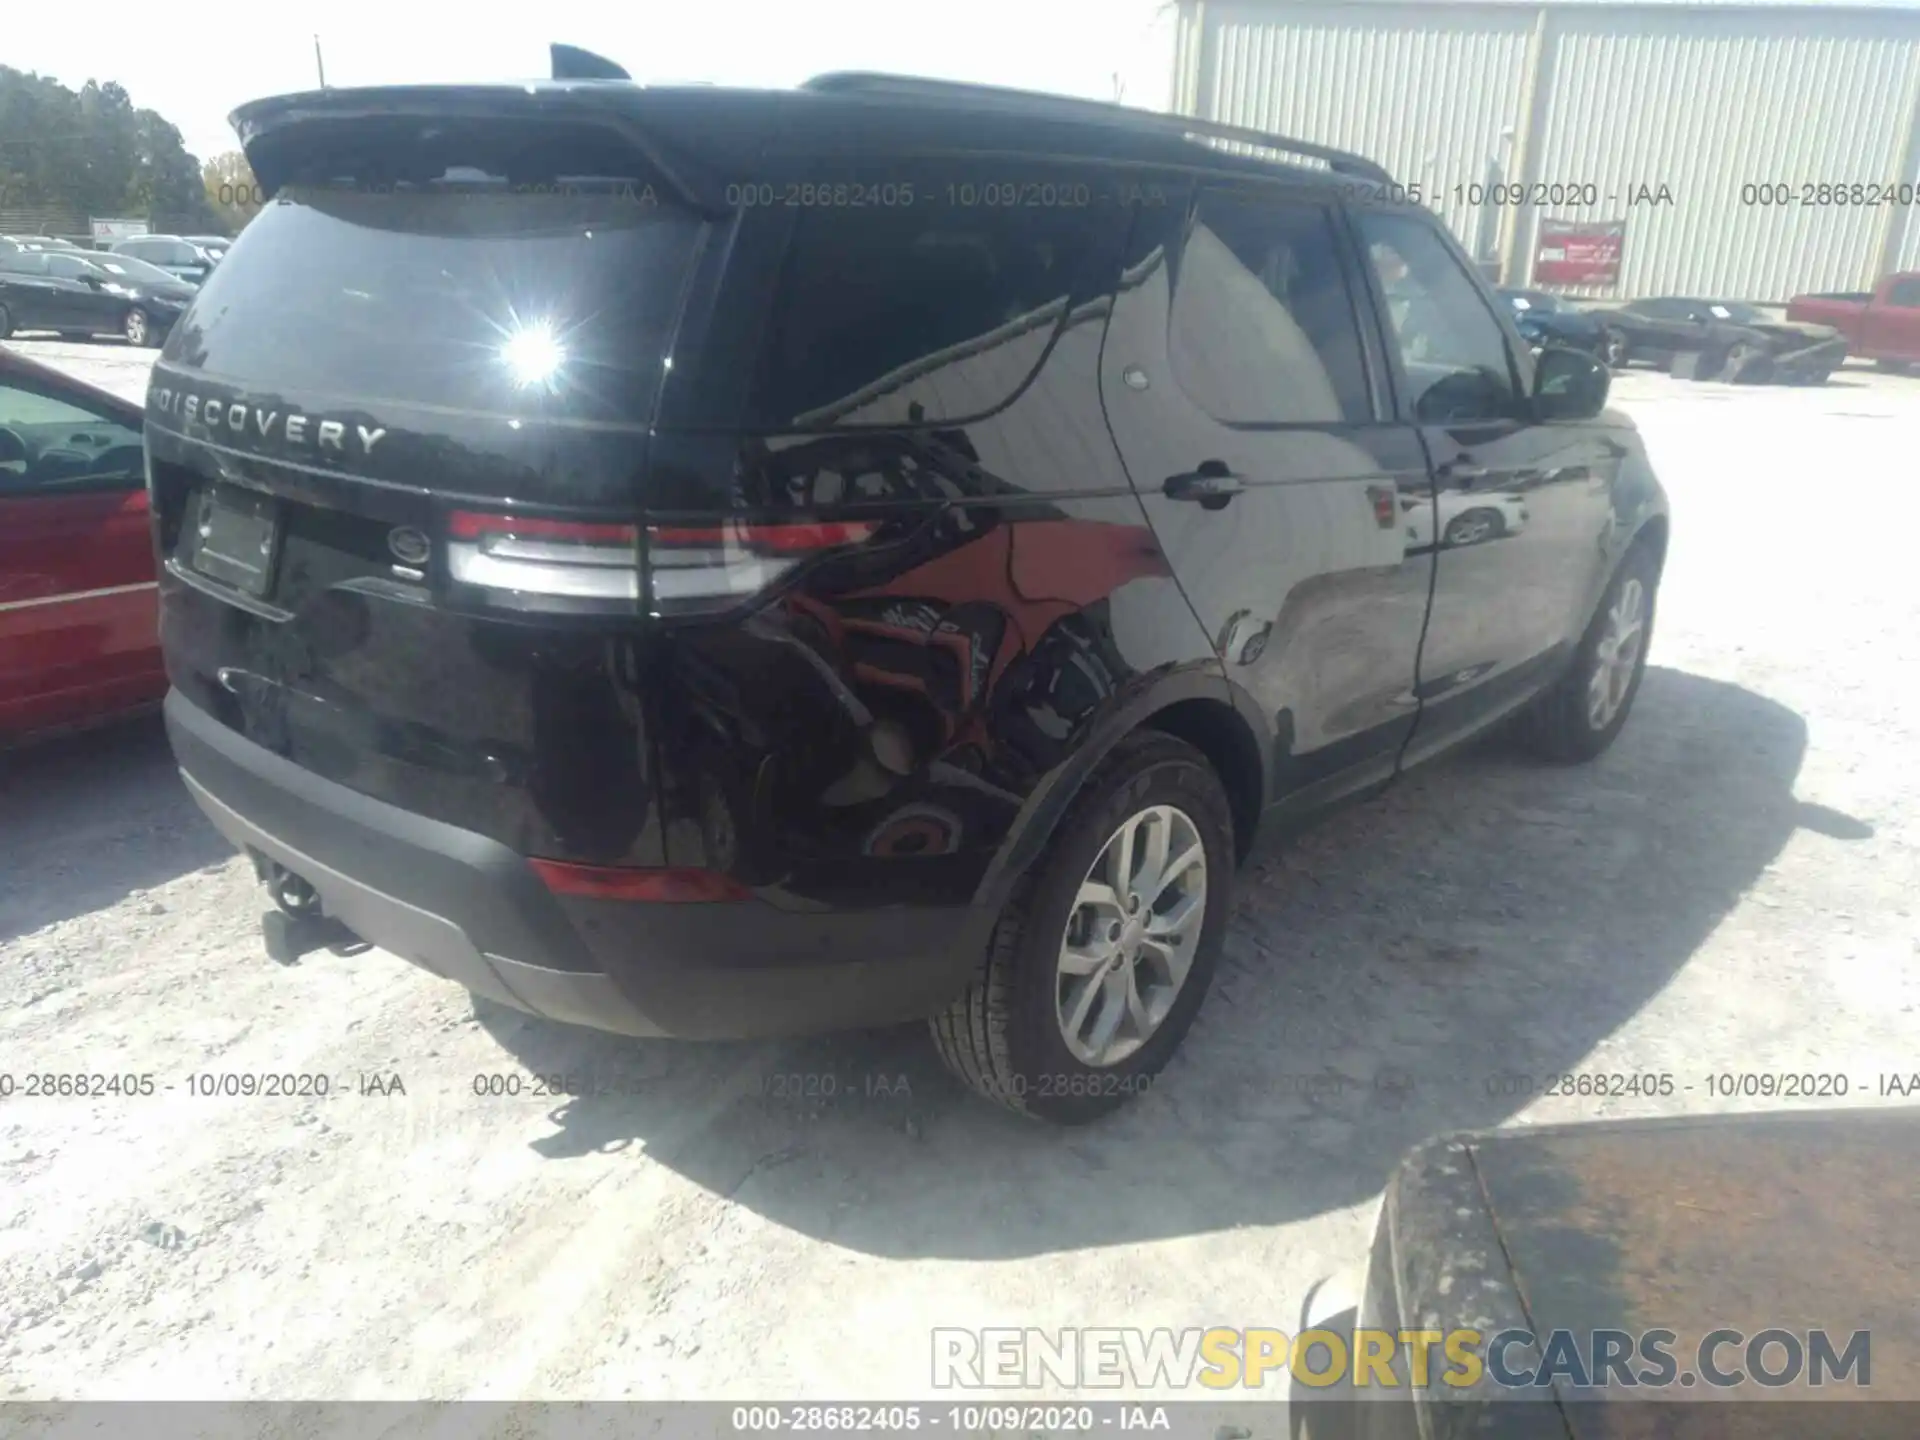 4 Photograph of a damaged car SALRG2RV1L2433289 LAND ROVER DISCOVERY 2020